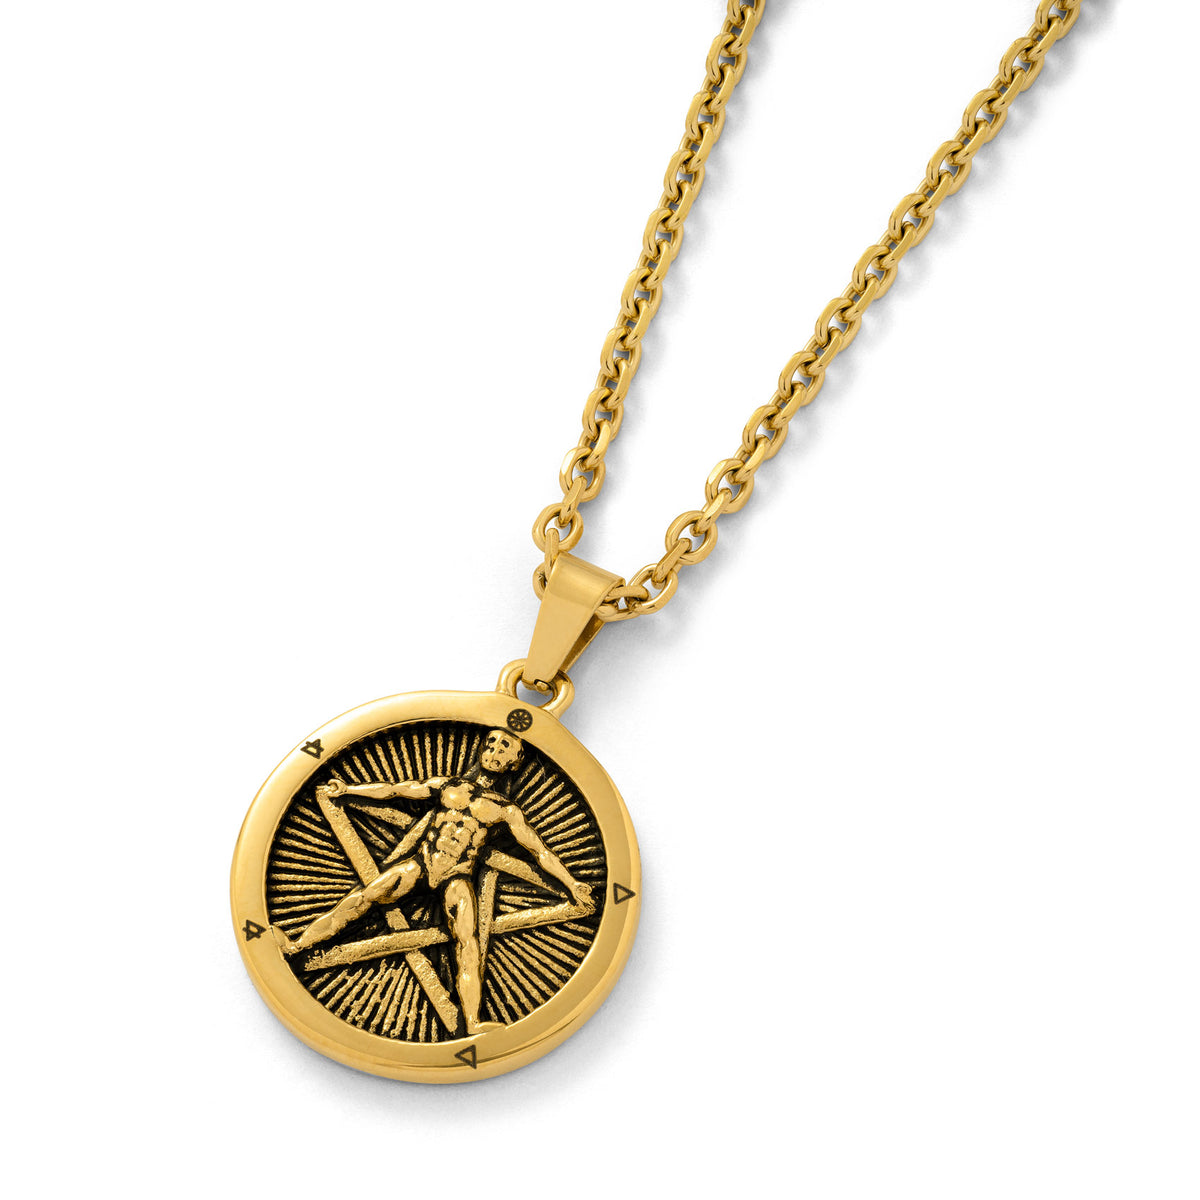 Gold star pentacle man necklace